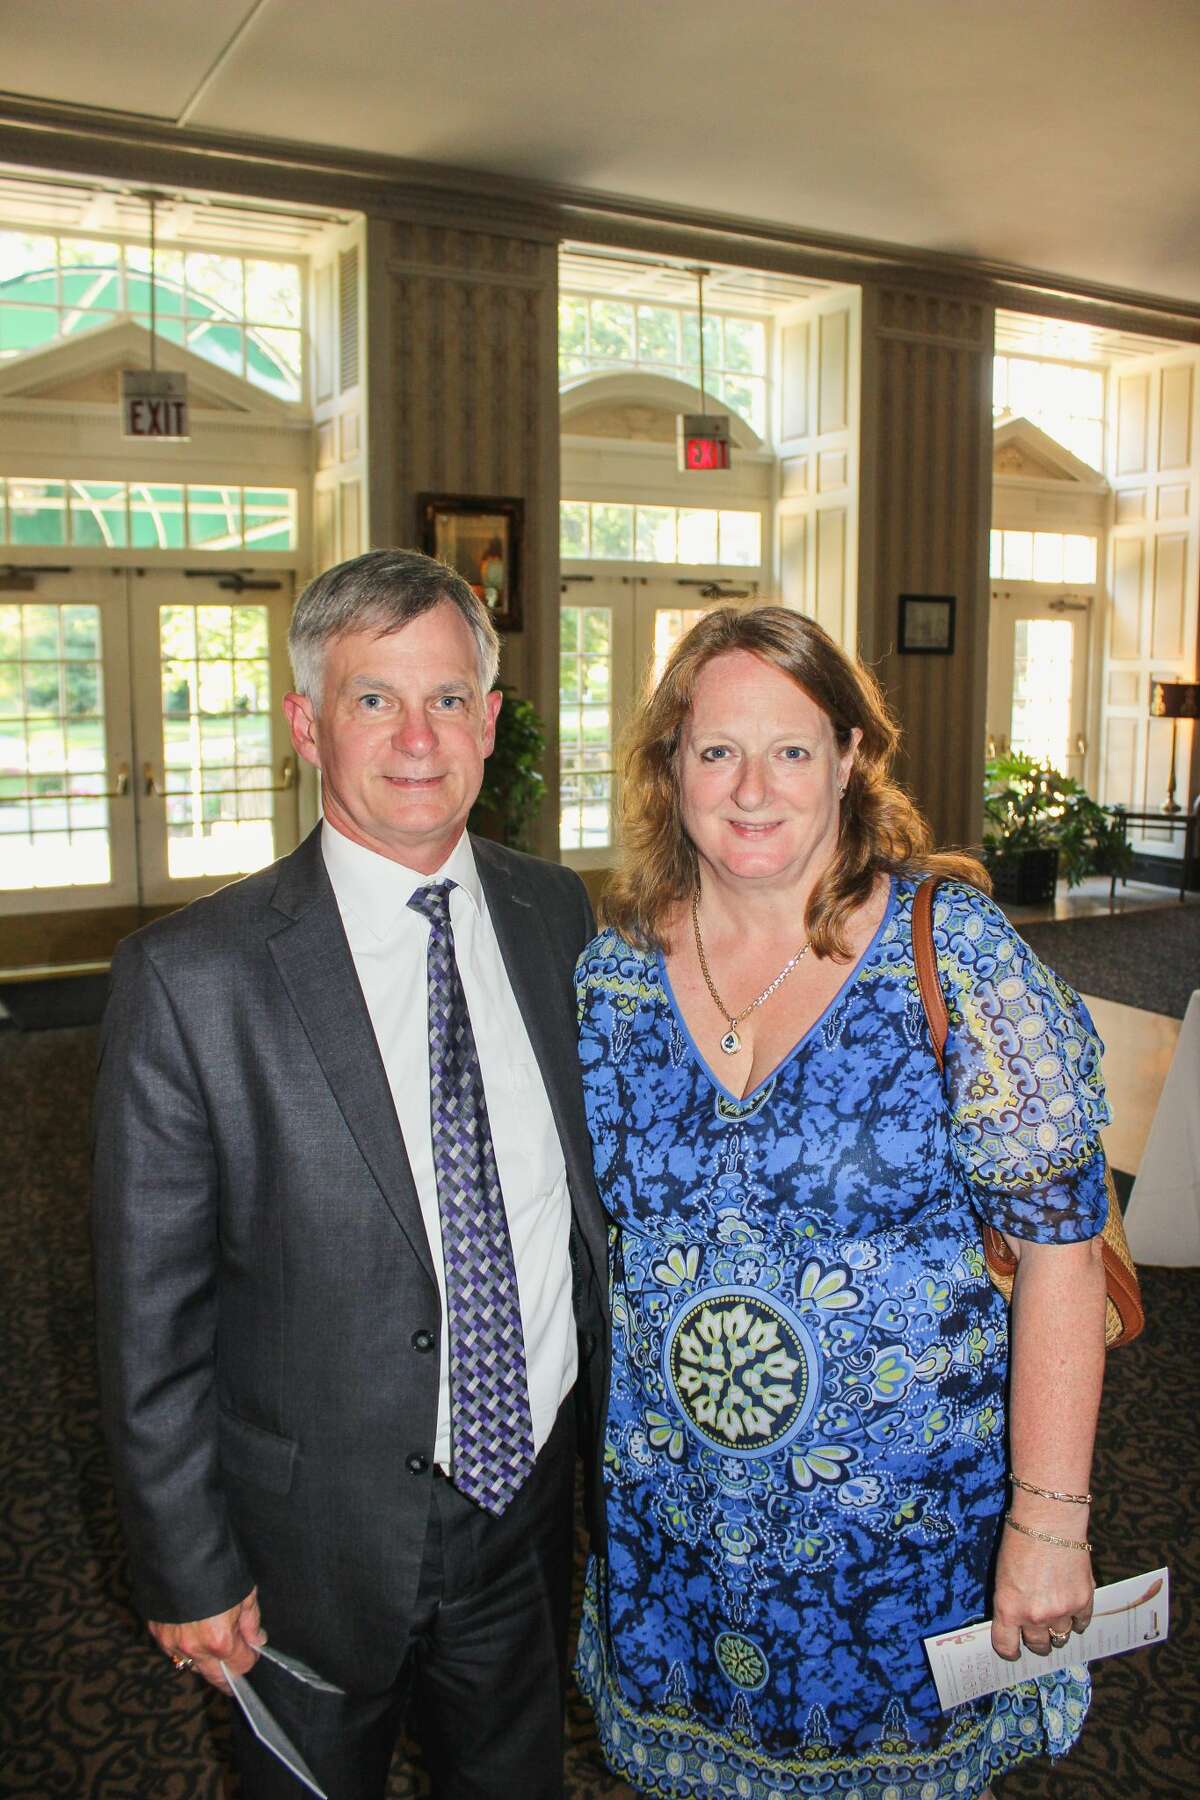 Were you Seen at the 9th annual Evening at the Symphony and Champagne Reception, a fundraising event for Catholic Charities Disabilities Services and Catholic Charities Care Coordination Services, held at The Hall of Springs and Saratoga Performing Arts Center on Wednesday August 3rd, 2016?